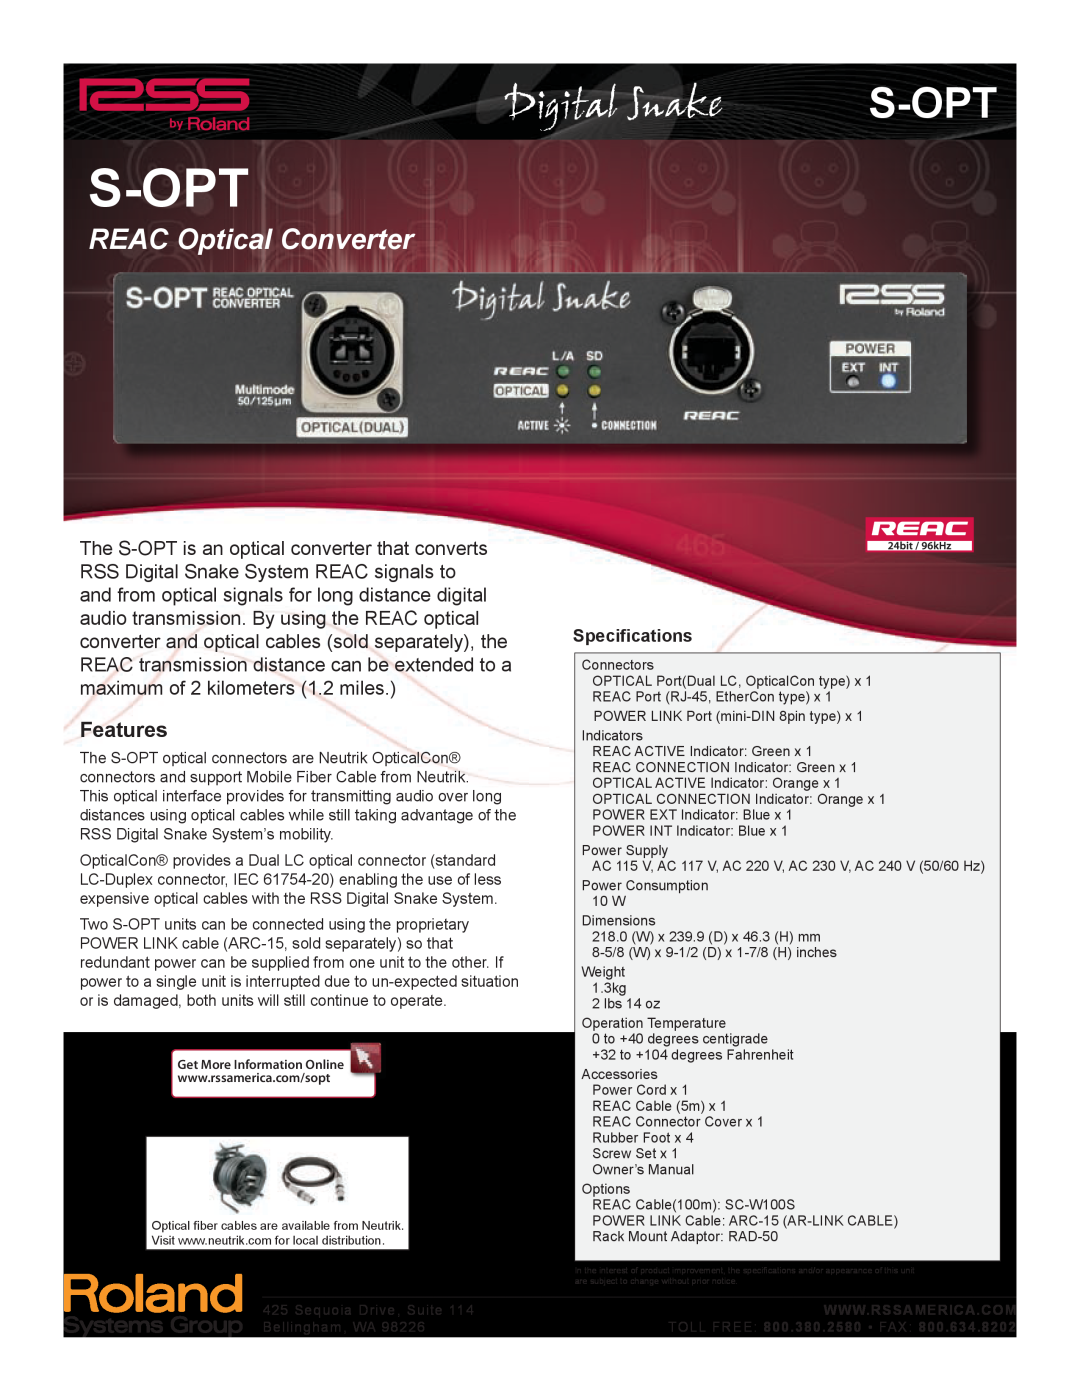 Roland S-OPT specifications S-Opt, TOLL FREE 800.380.2580 FAX, REAC Optical Converter, Features, Specifications 